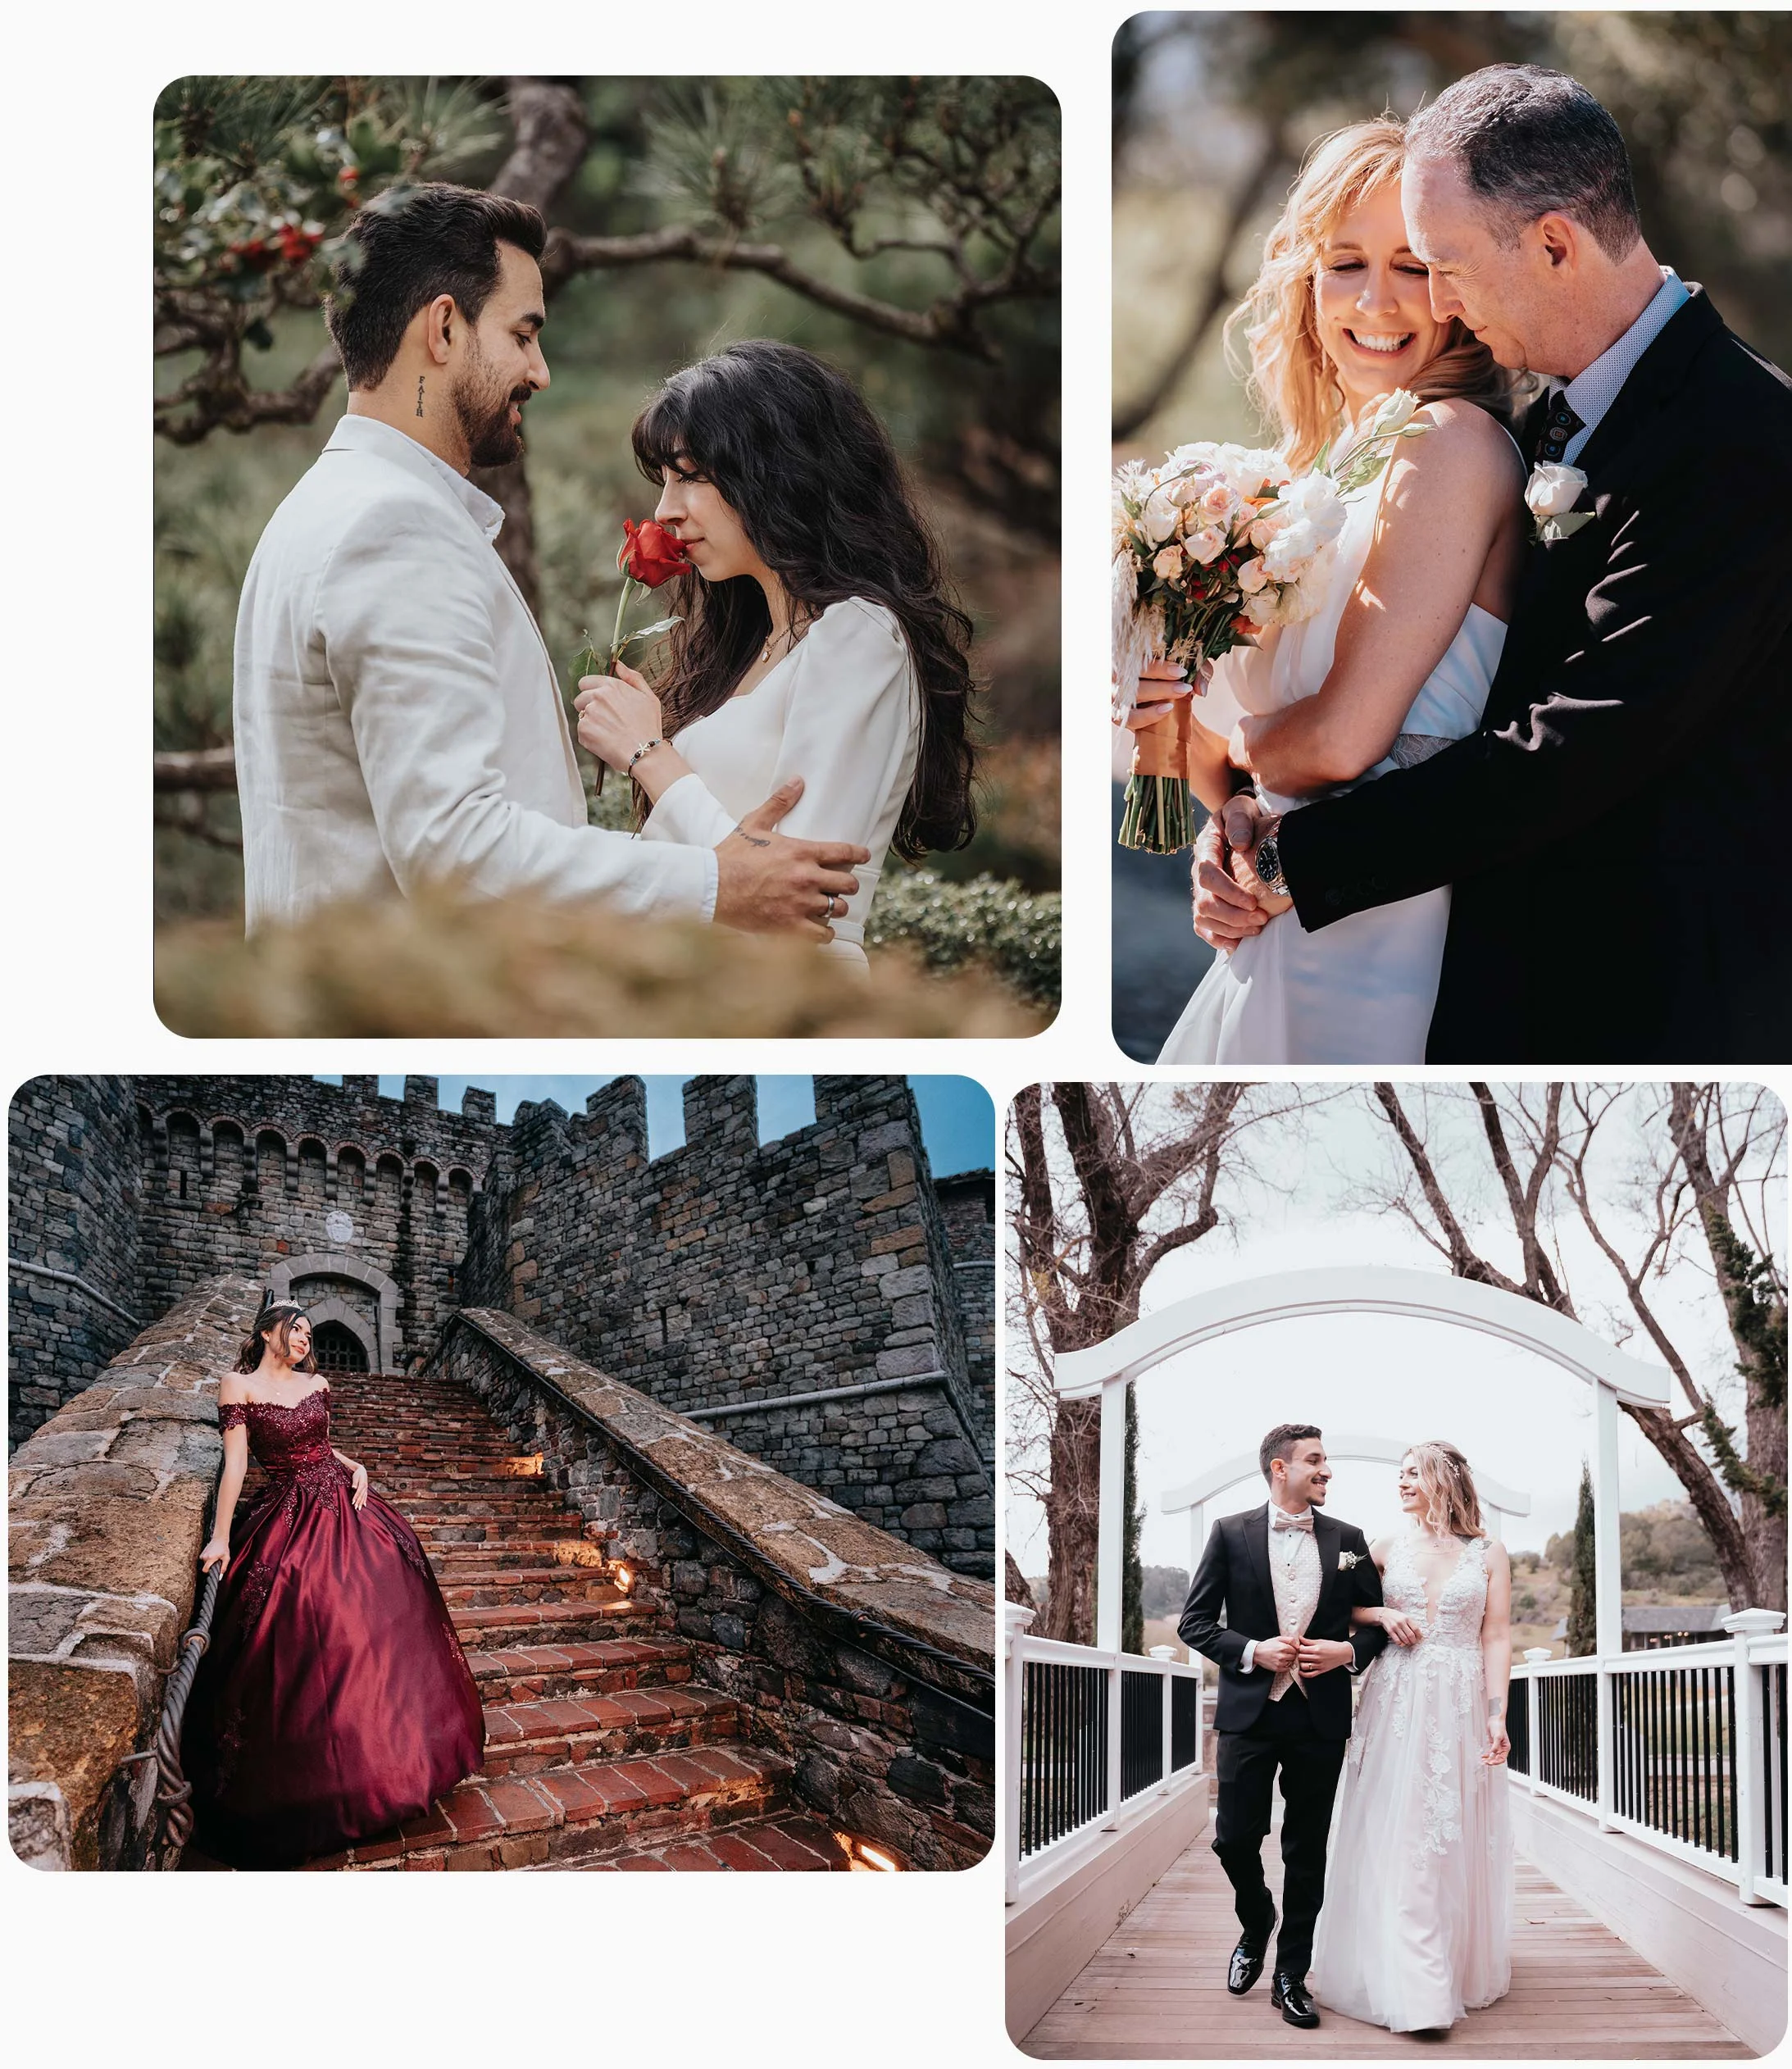 A collage of photos of a bride and groom at a castle, captured by an engagement photographer.